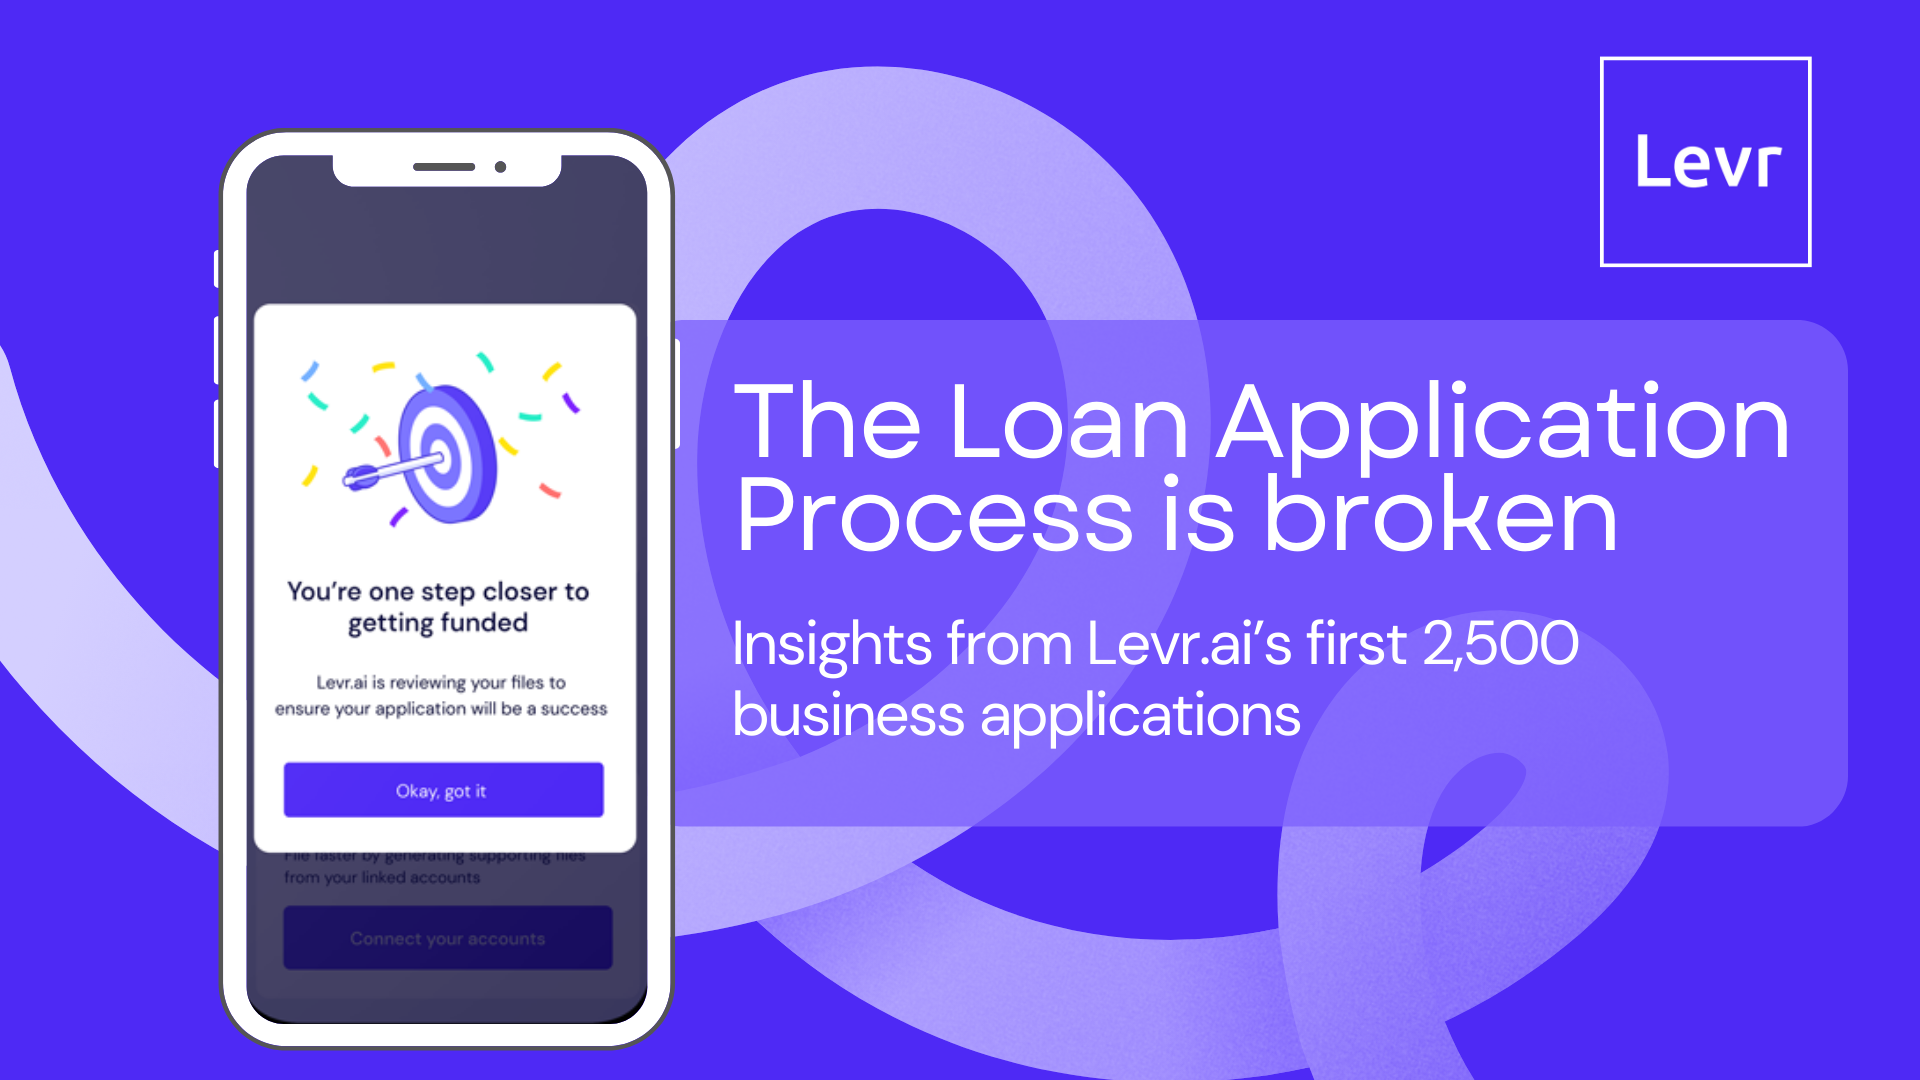 levr.ai - Here’s 5 innovative strategies lenders can adopt to improve their loan application process and systems.